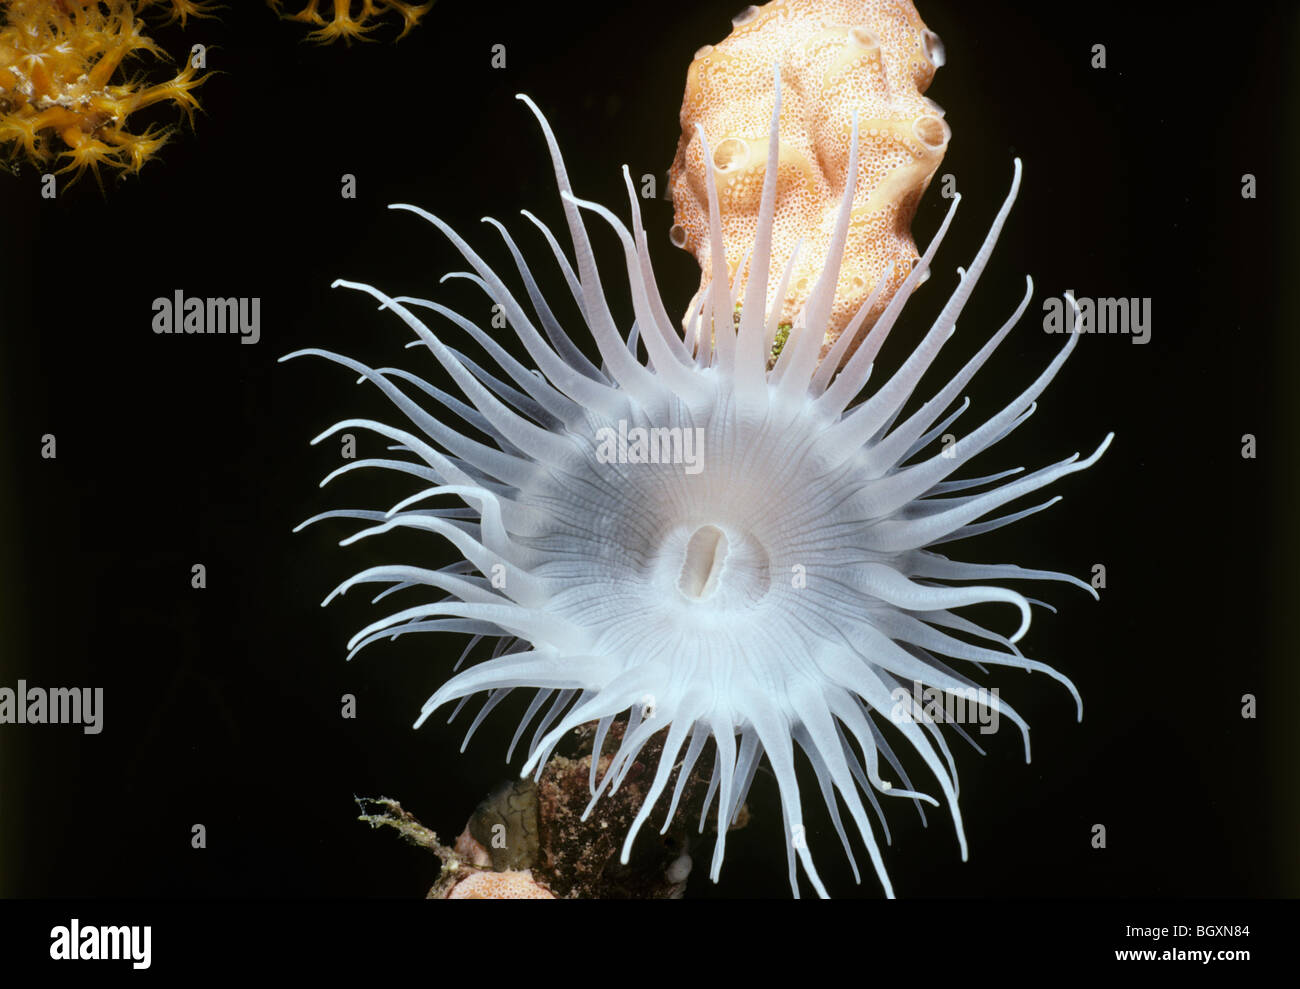 Mouth of White-spotted Rose Anemone (Tealia lofotensis). Channels Island, California, Pacific Ocean Stock Photo